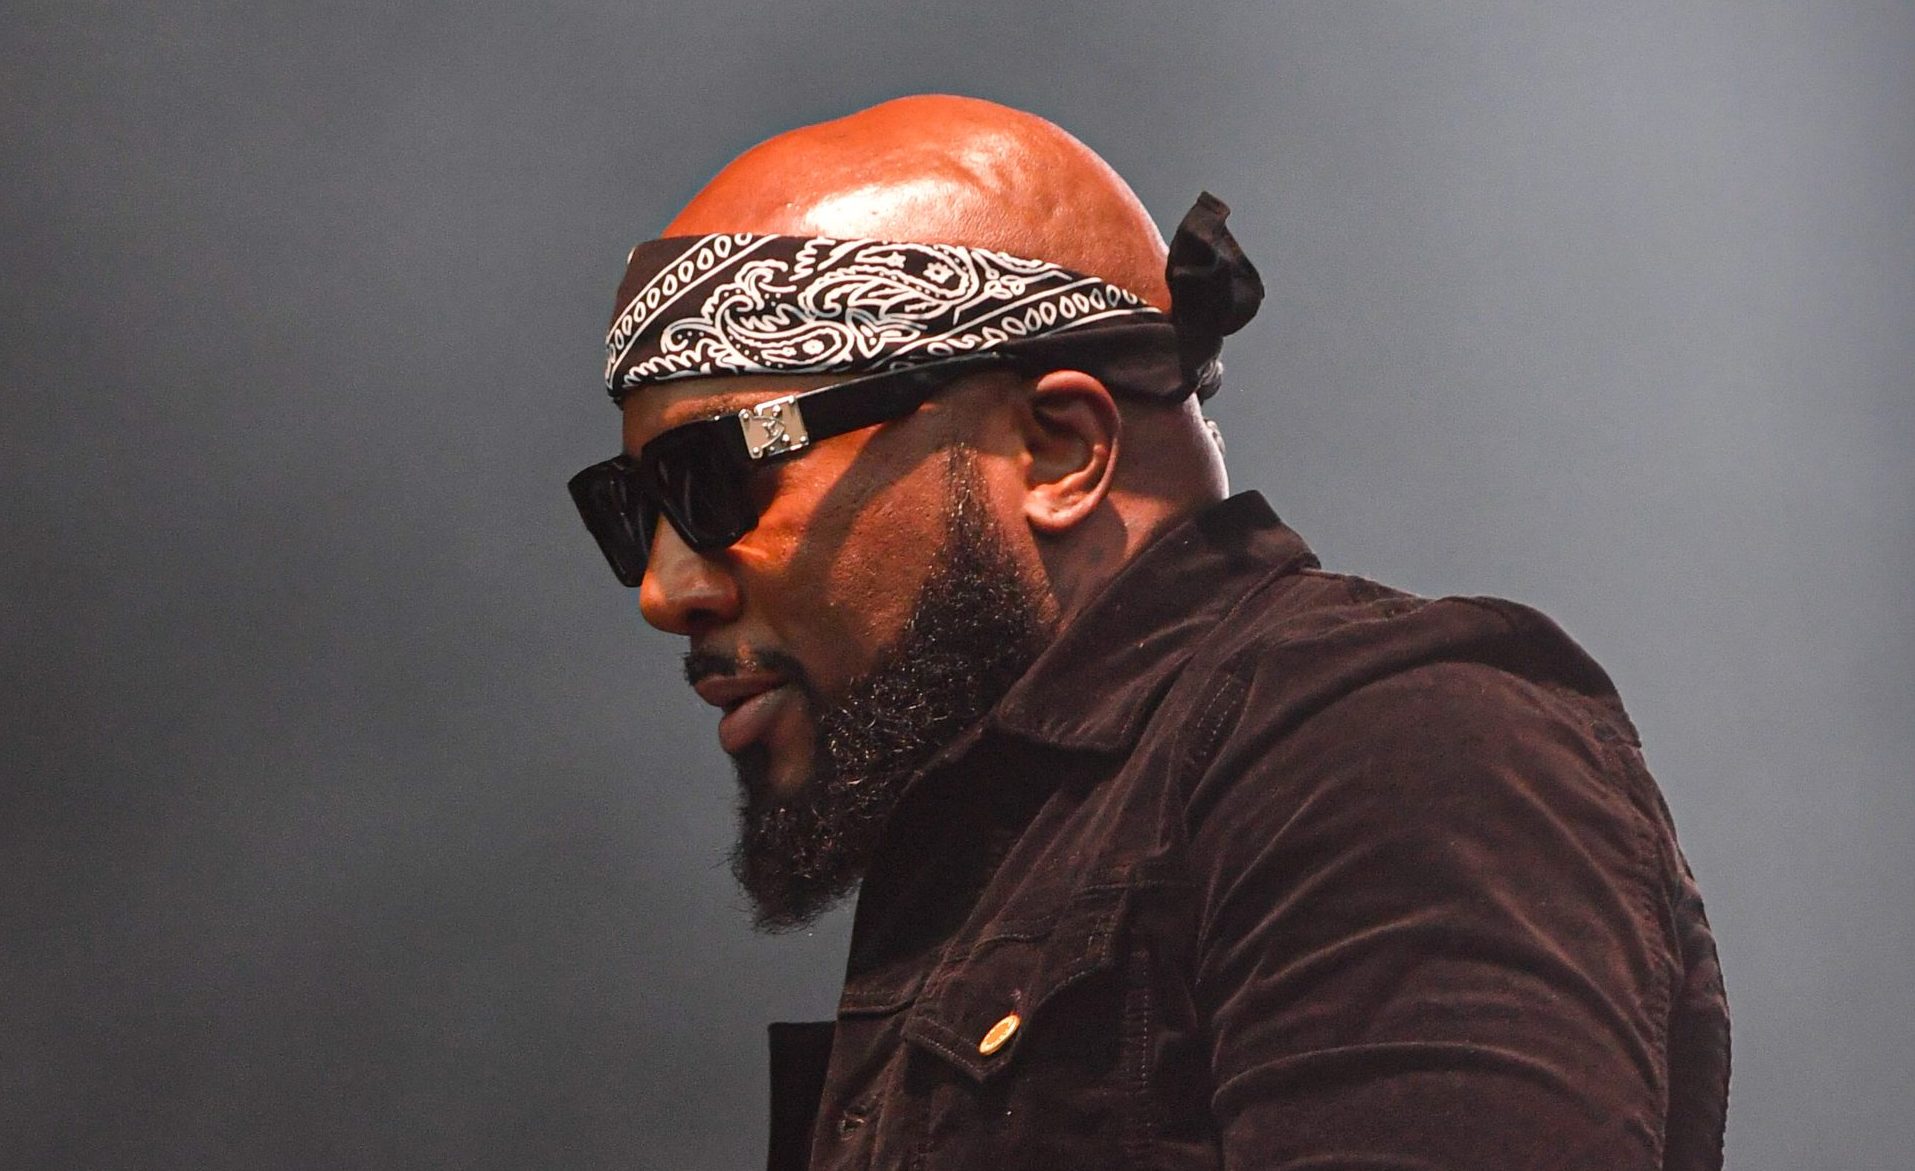 Jeezy Is Minding His "Spiritual Business" Rather Than Seeking Validation From Street Cred